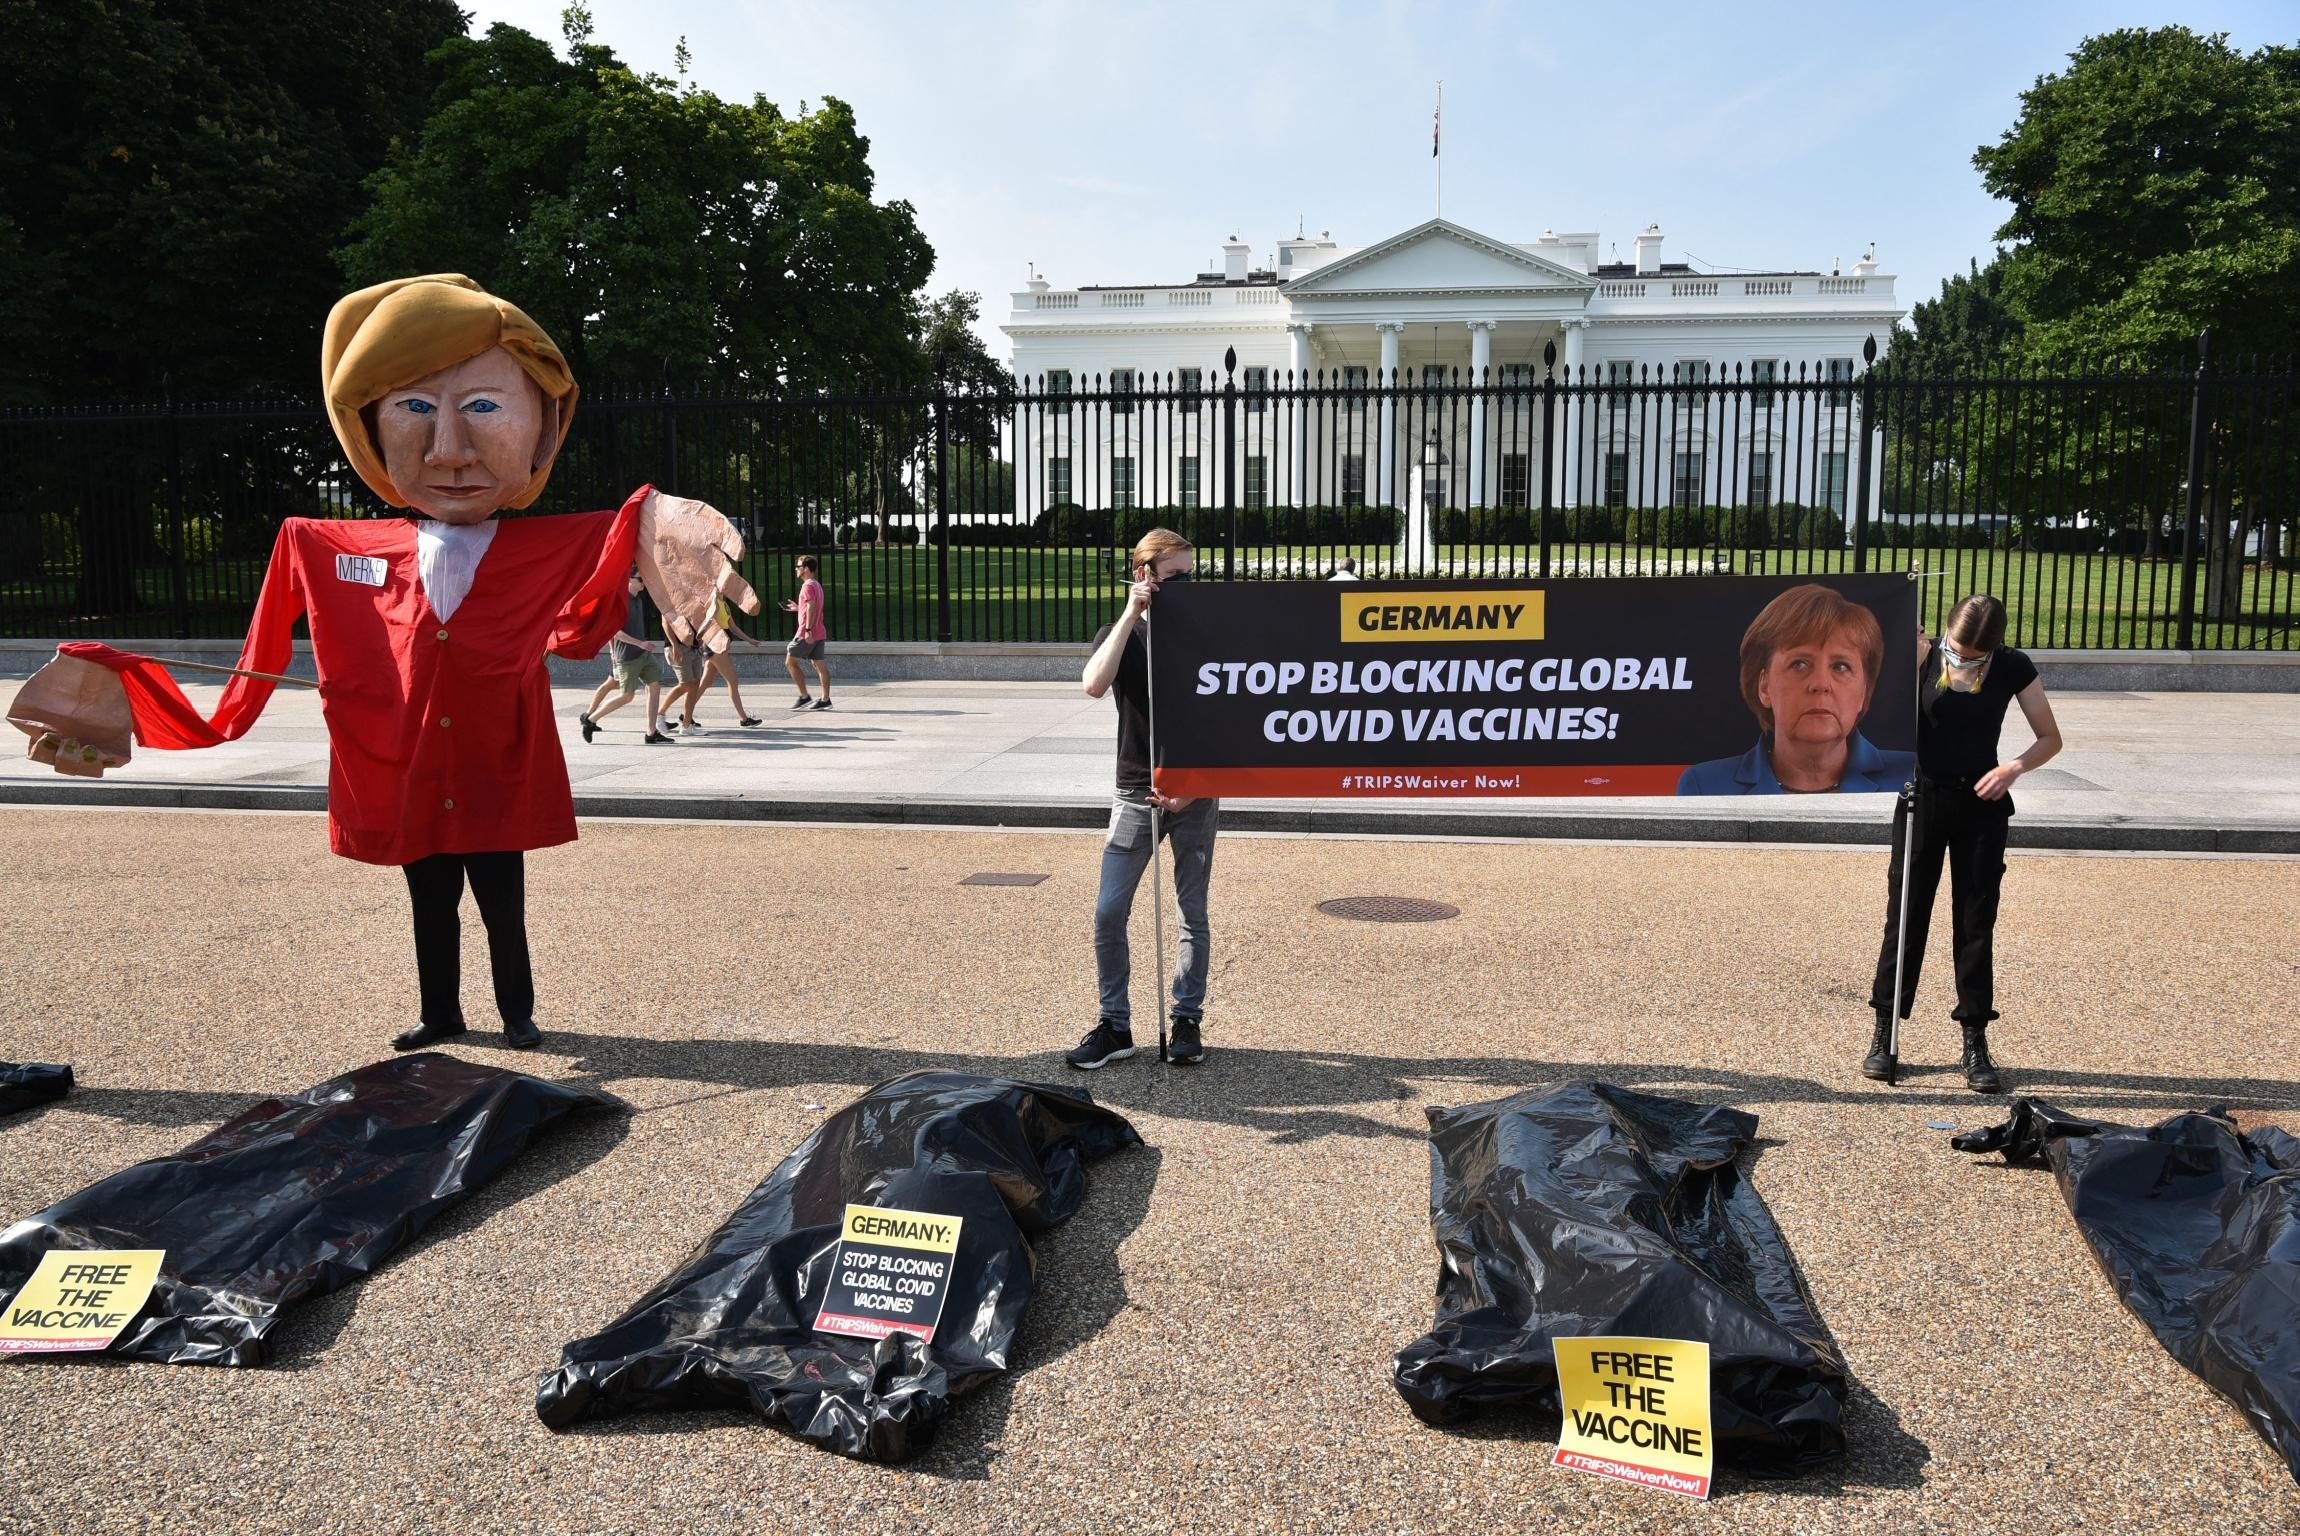 An effigy of German Chancellor Angela Merkel is displayed during a protest calling for the suspension of intellectual property barriers to facilitate the increased production of Covid-19 vaccines, at Lafayette Square in front of the White House in Washington, D.C. on July 15, 2021. (Photo: Mandel Ngan/AFP via Getty Images)